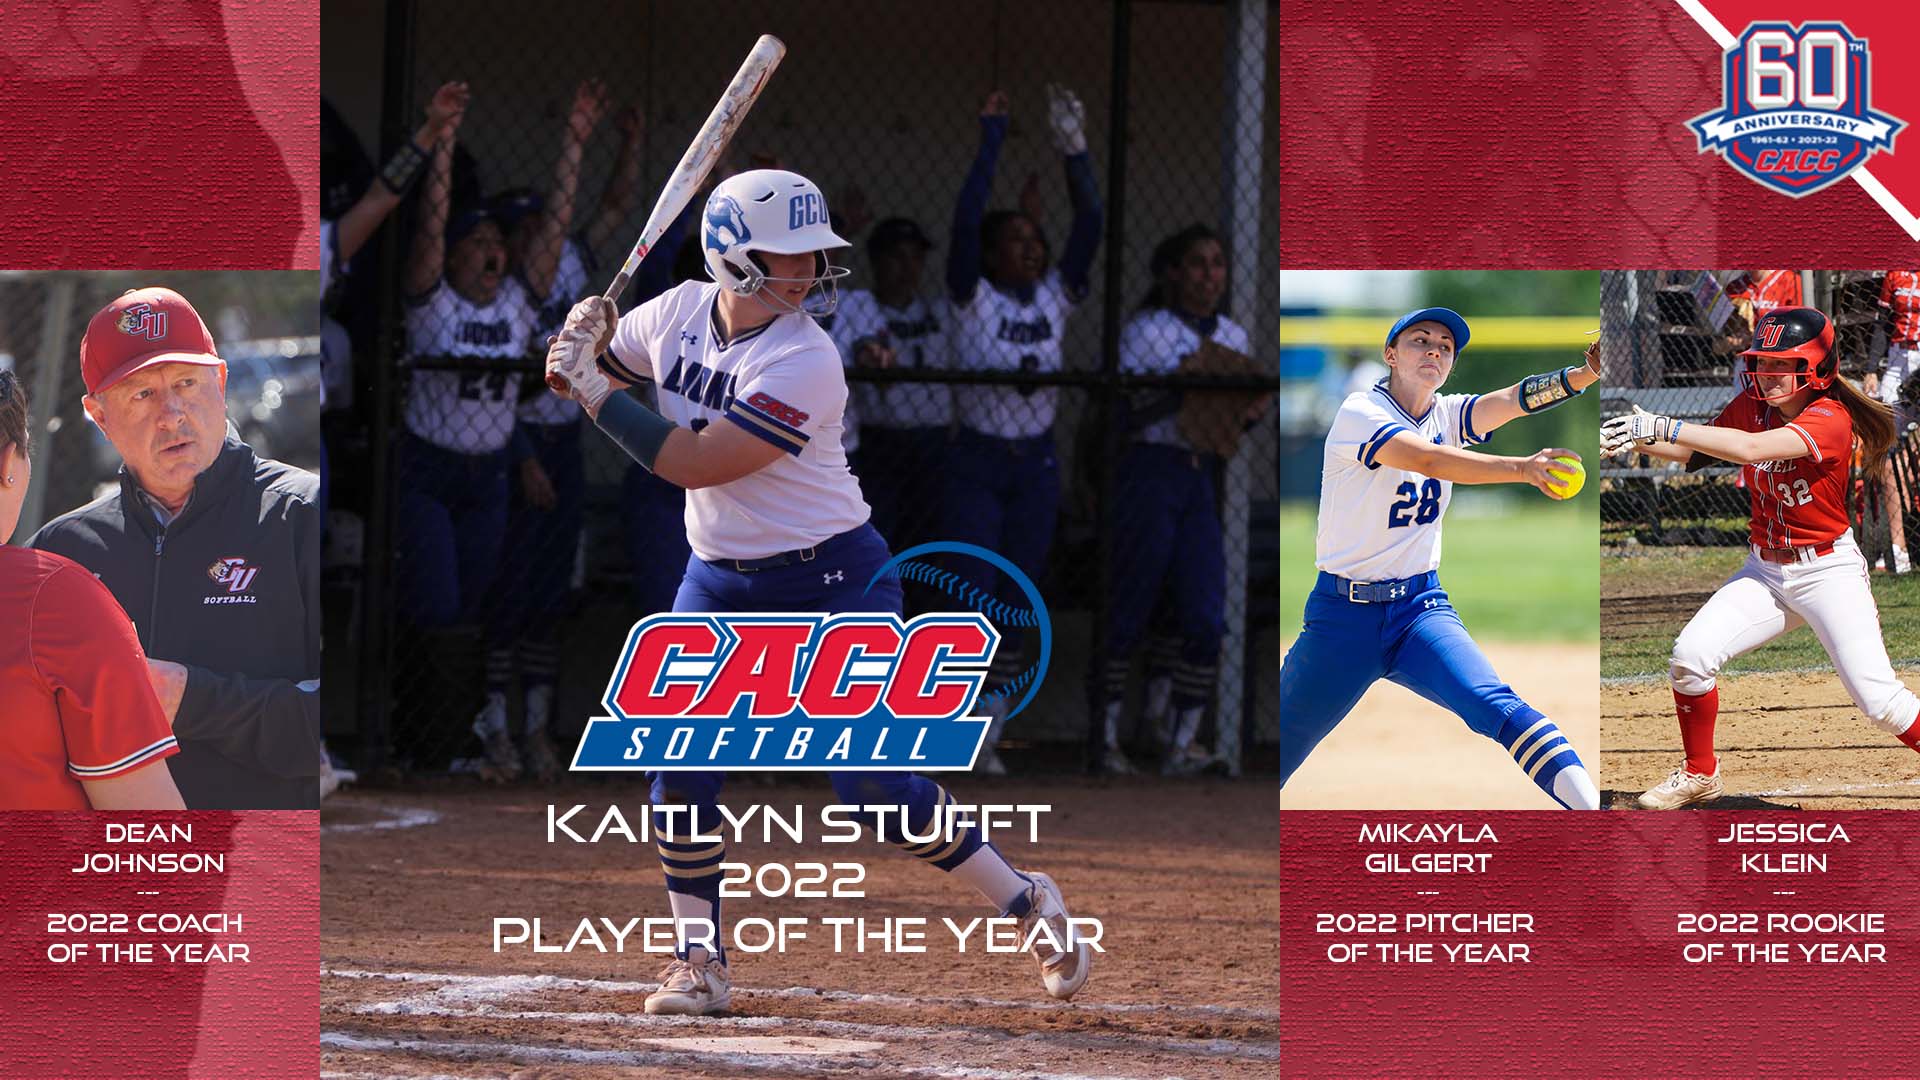 GCU's Kaitlyn Stufft Named CACC Softball Player of the Year